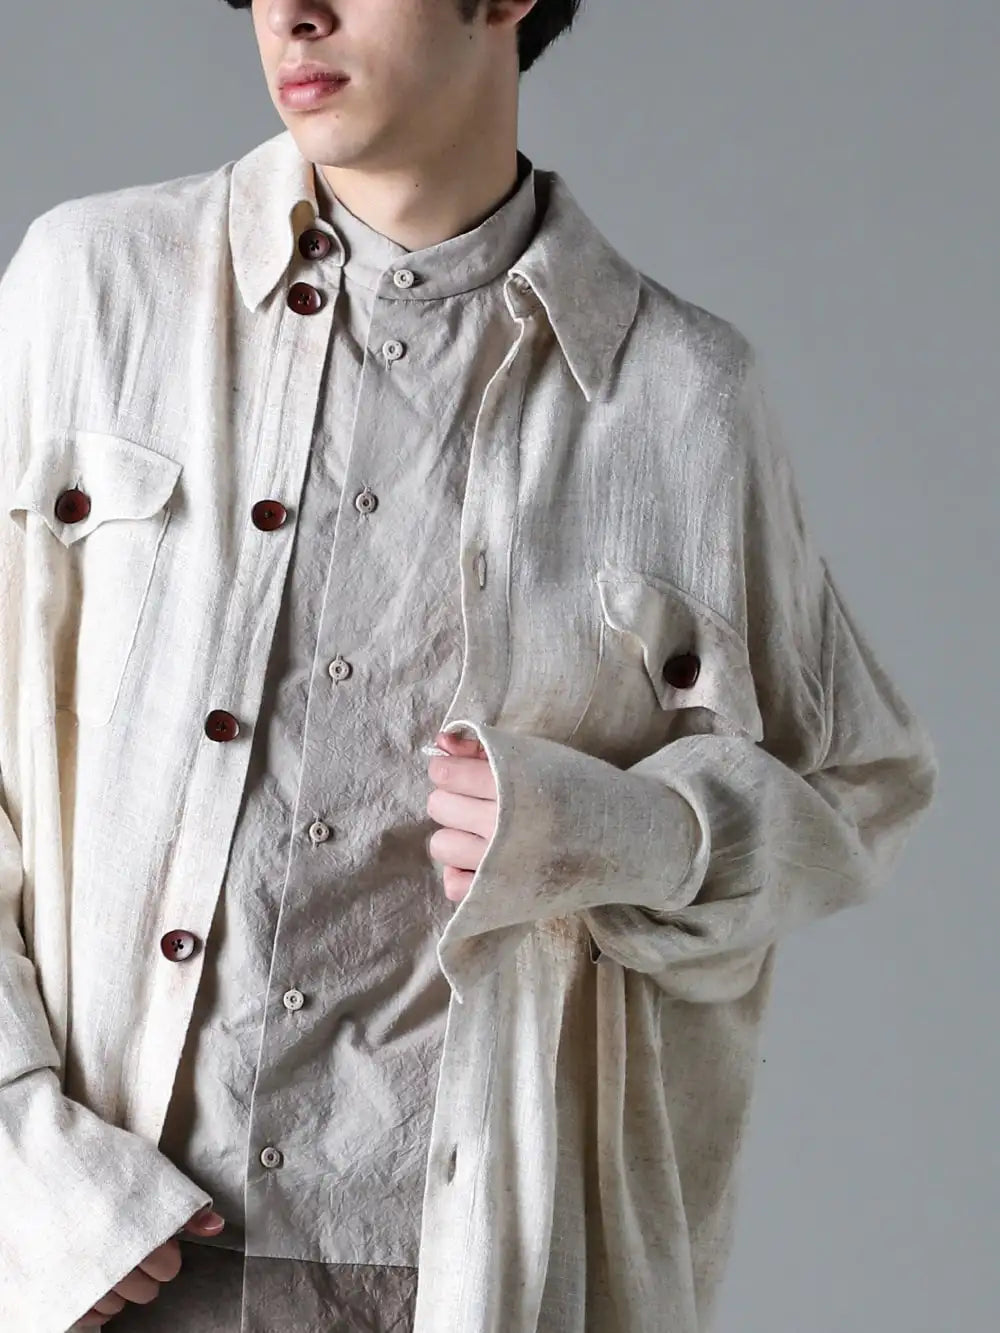 Peng Tai DEVOA 24SS  - Oversized shirts tailored with a neutral atmosphere - PTS24M06-2 Hand Dye Double Pocket Oversized Shirt SHE-CTKM Shirt Cotton 2-003